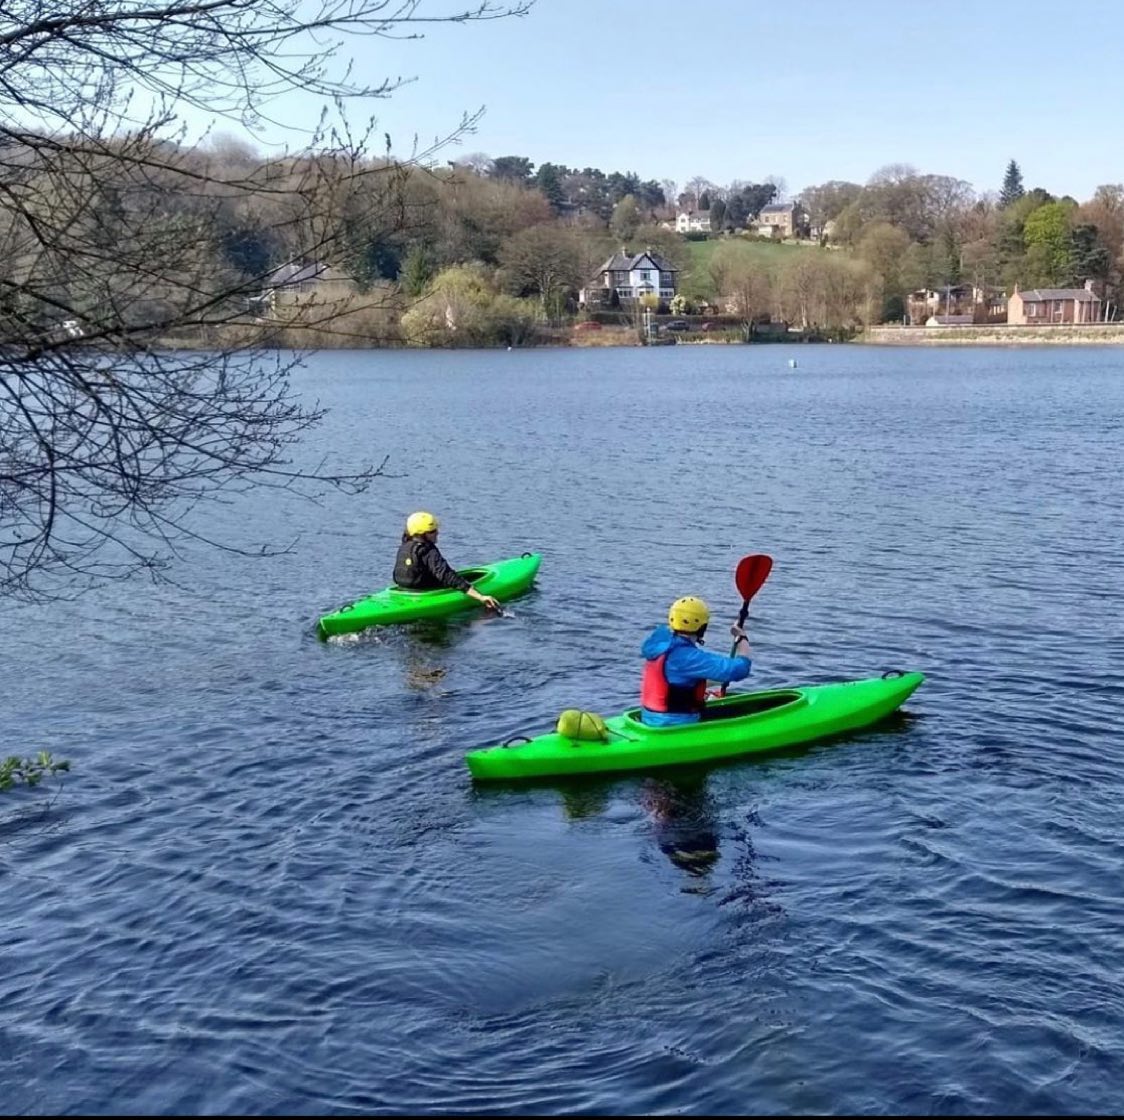 Join us this Saturday 1 May for Kayaking at Errwood Reservoir (2-5pm) or Climbing and Abseiling at Windgather (10am - 4pm). Suitable for all from 10+, we hope to see you here.

More info and booking at www.wilderness-development.com, link in our bio 🧗‍♀️🛶🧗‍♀️
.
.
.
#wildernessdevelopment #smallbusiness #kayaking #watersports #kayak #trysomethingnew #buxton #rockclimbing #climbing #scrambling #abseiling #trysomethingnew #peakdistrict #peakdistrictnationalpark #peakdistrictclimbing #mountainsfellsandhikes #roamtheuk #outdoorpursuits #outdooradventures #outdooractivities #nationalparksuk #booknow